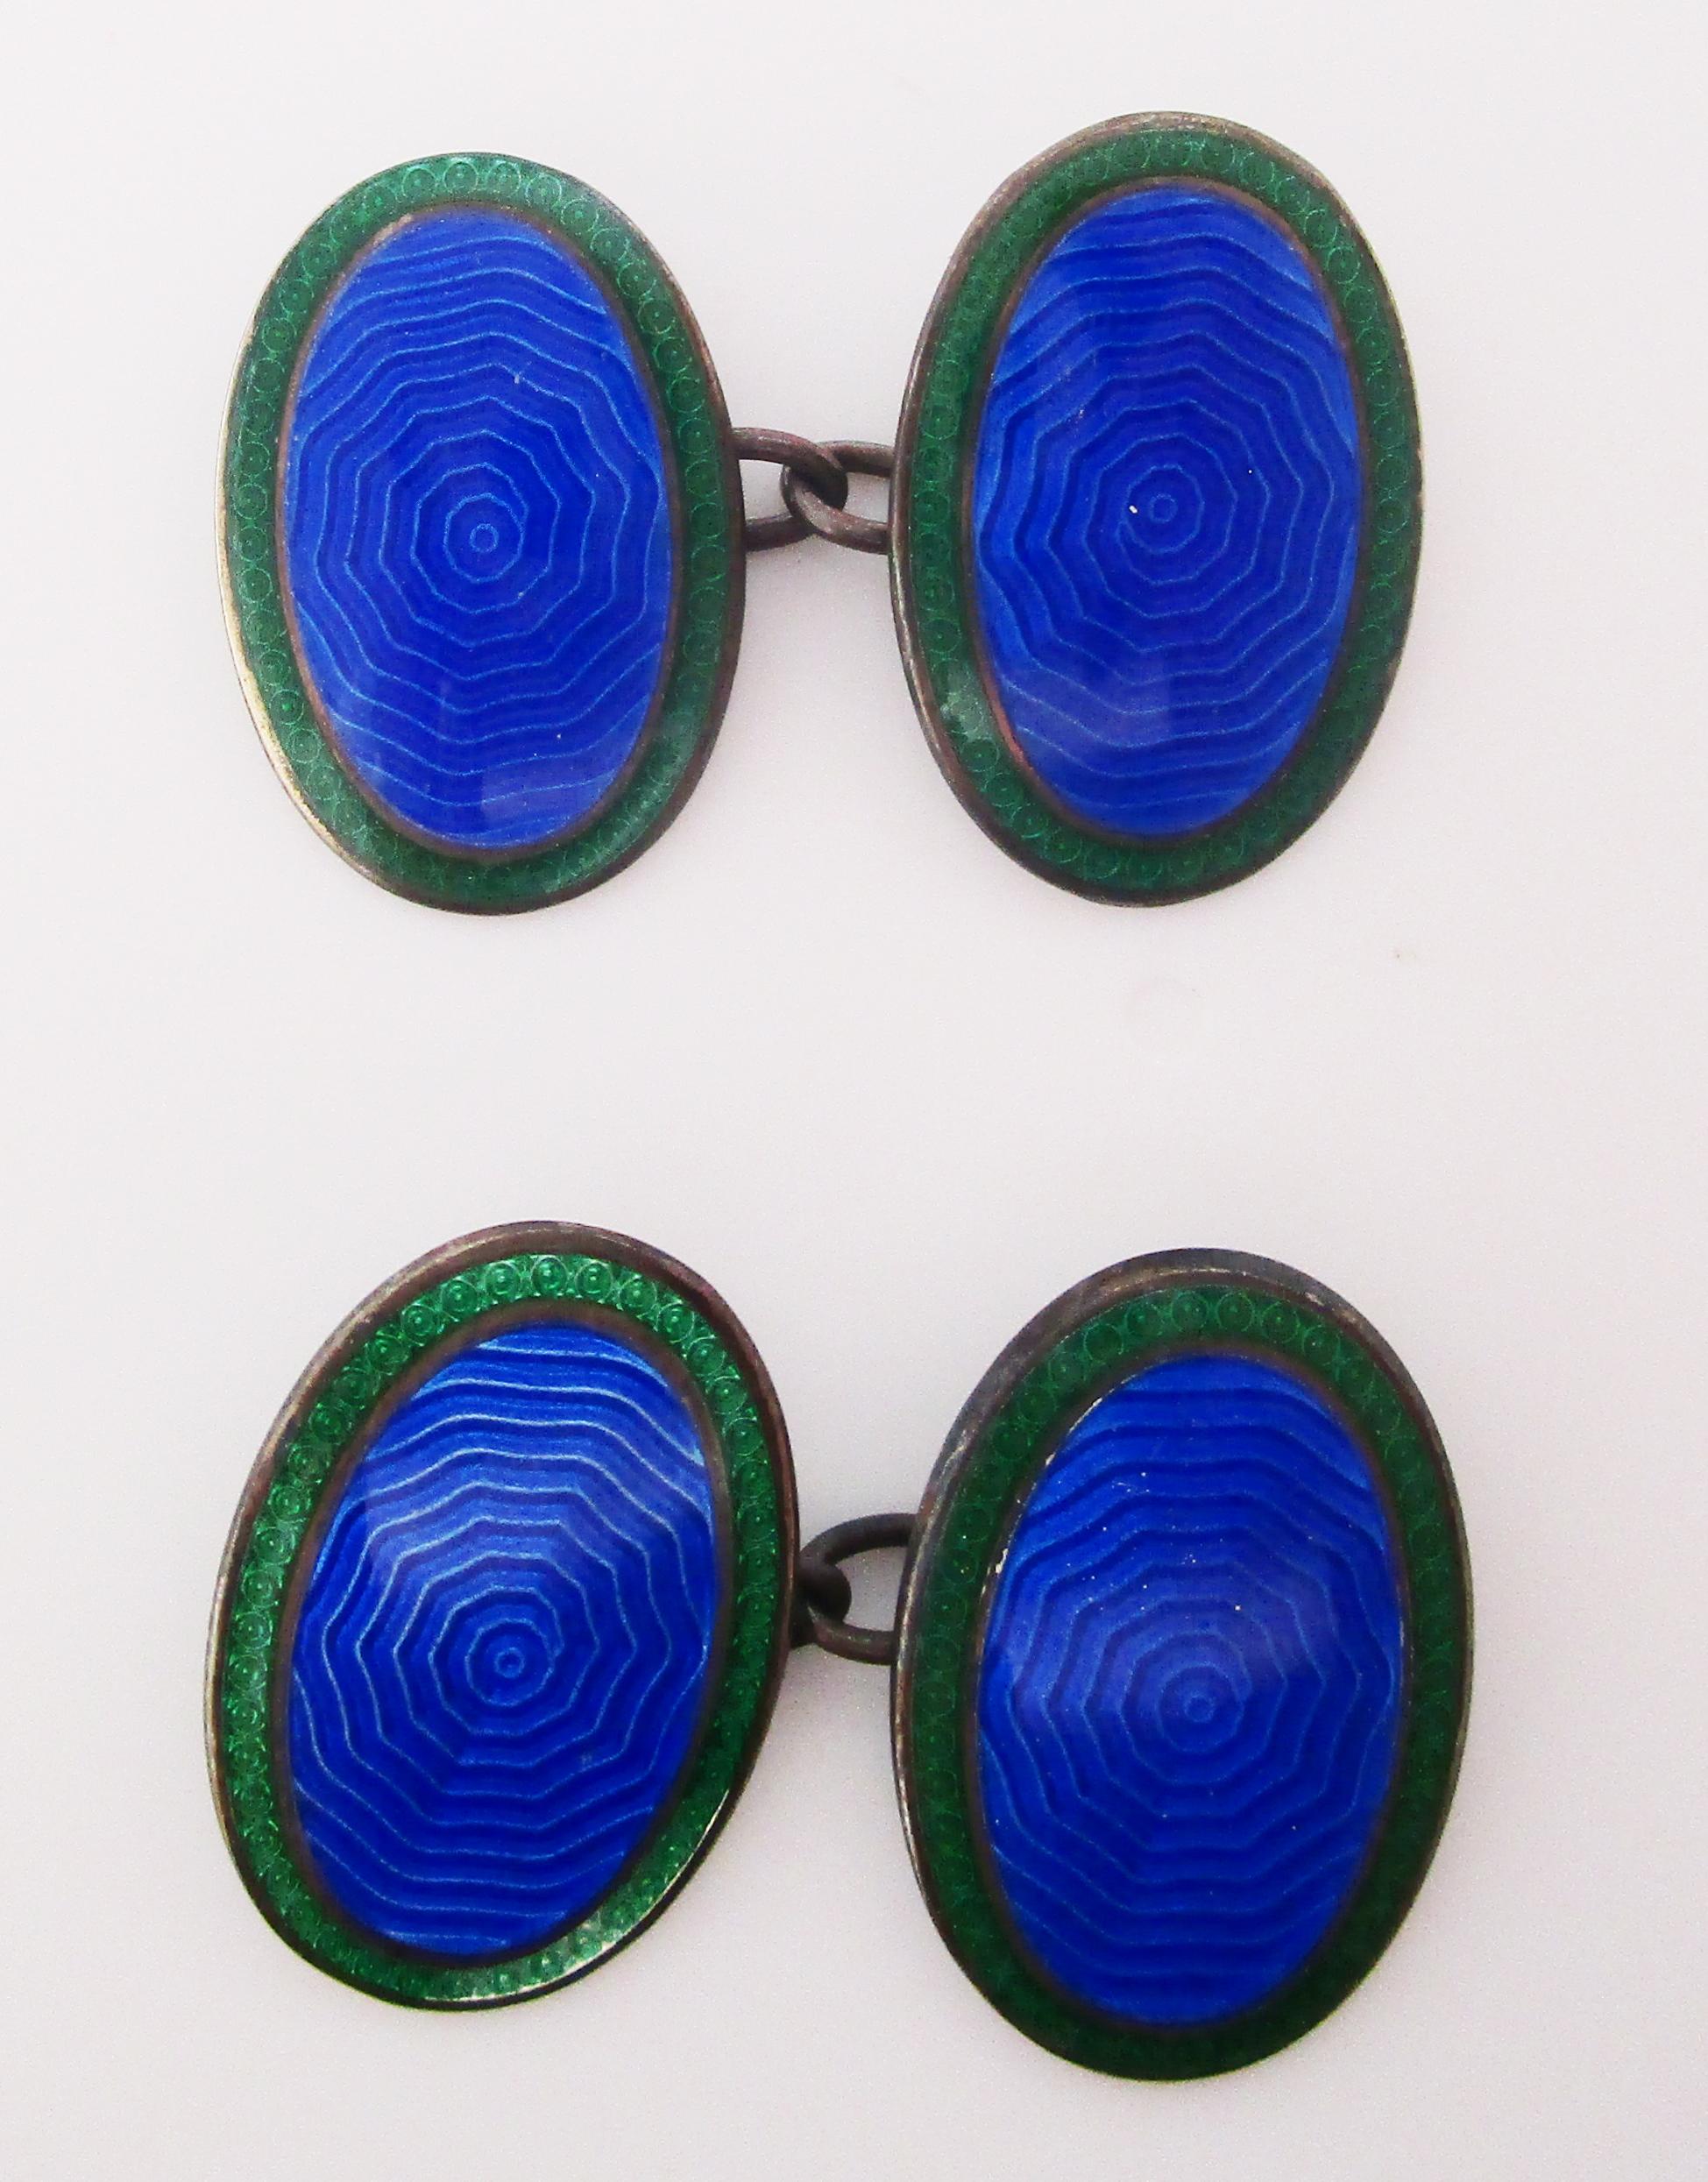 This stunning pair of Art Deco links is in sterling silver and features bright blue guilloche enamel centers and rich green enamel borders. The enamel center features a subtle concentric circle pattern that adds a layer of intrigue to this classic